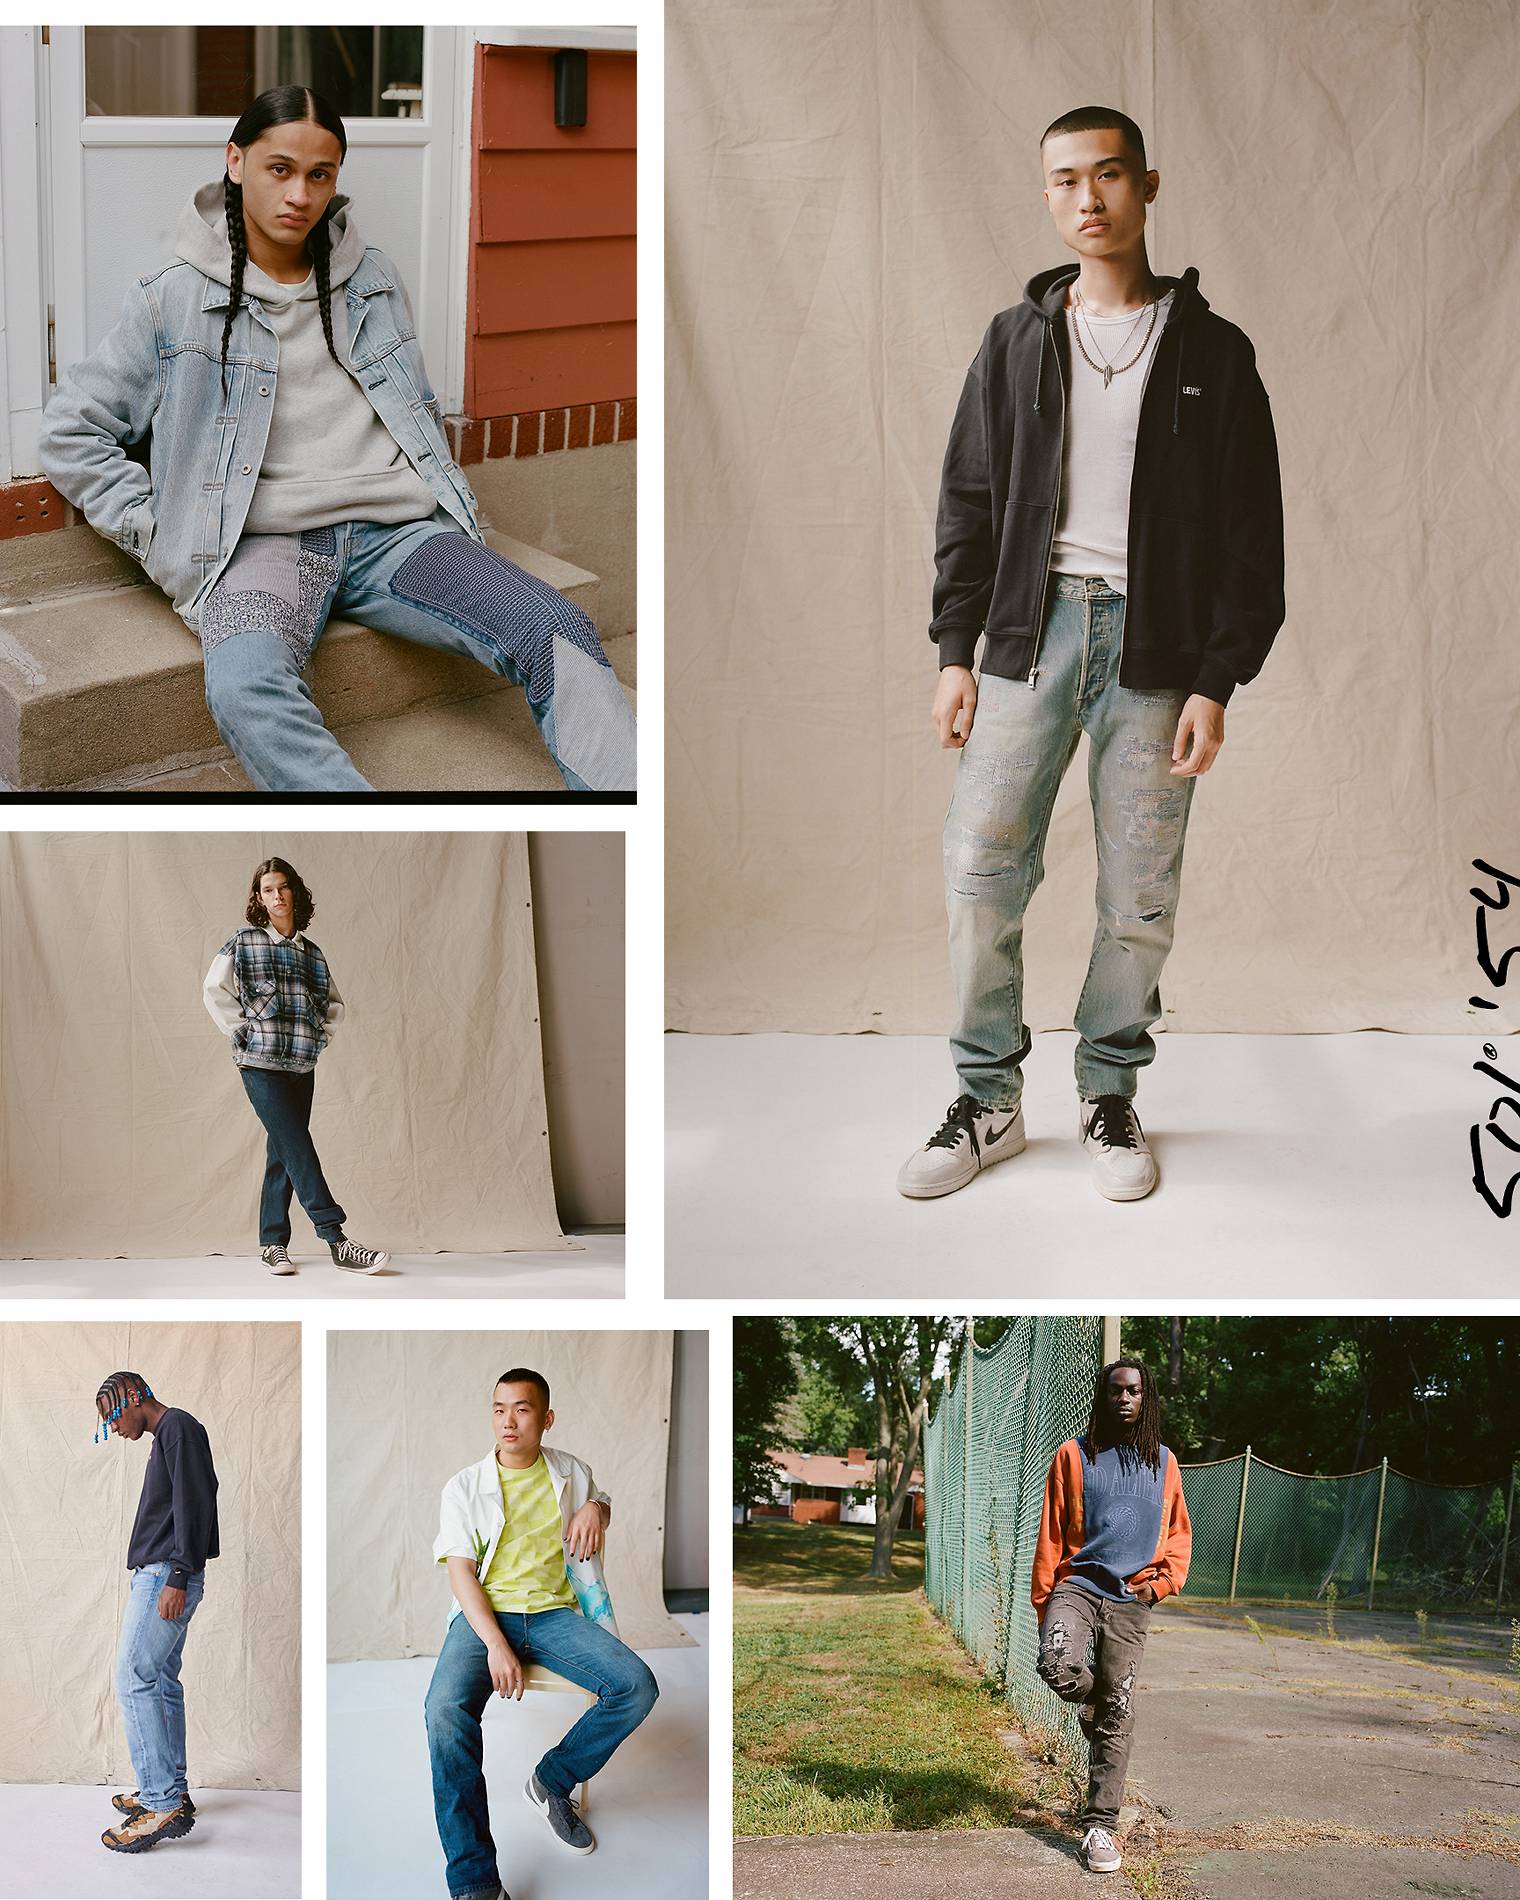 Levi's Introduces Their First-Ever Circulair 501 Jeans - Long John